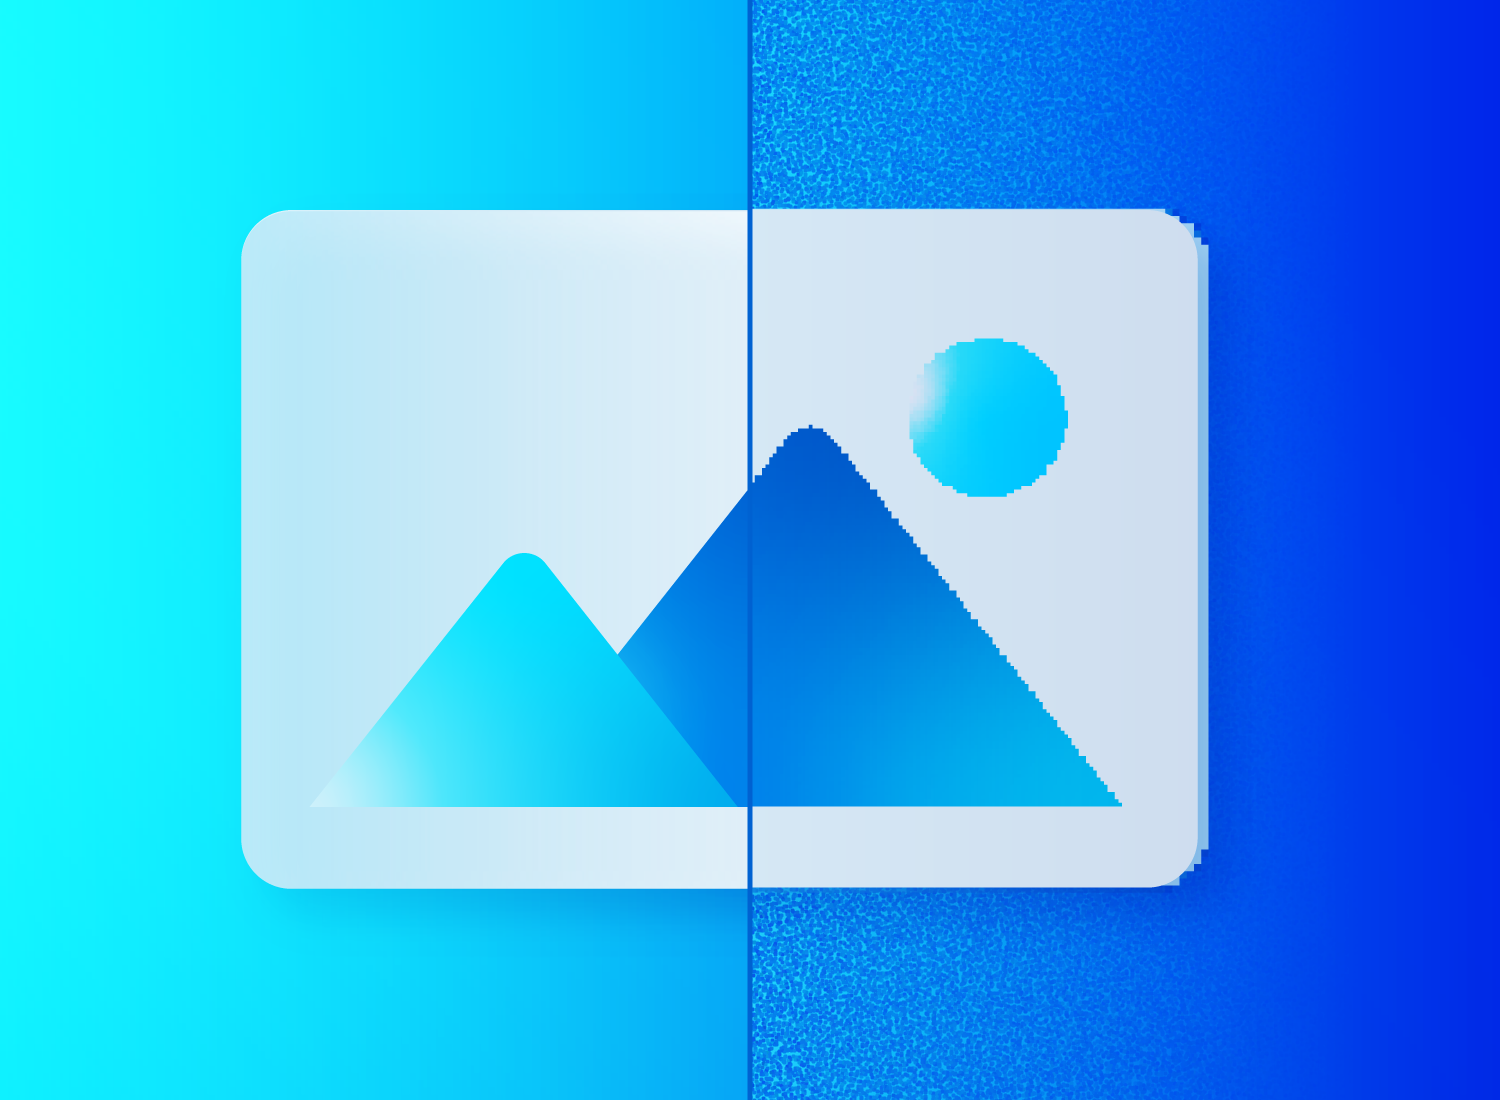 This image is a creative illustration designed to represent the concept of high-resolution images. It features a split background with two shades of blue. Overlapping this bicolor background is a photo gallery icon graphic consisting of two overlapping squares with rounded corners. The texture on the right half of the background is more pixelated, contrasting with the smoothness on the left, symbolizing the difference between high-resolution and low-resolution images.